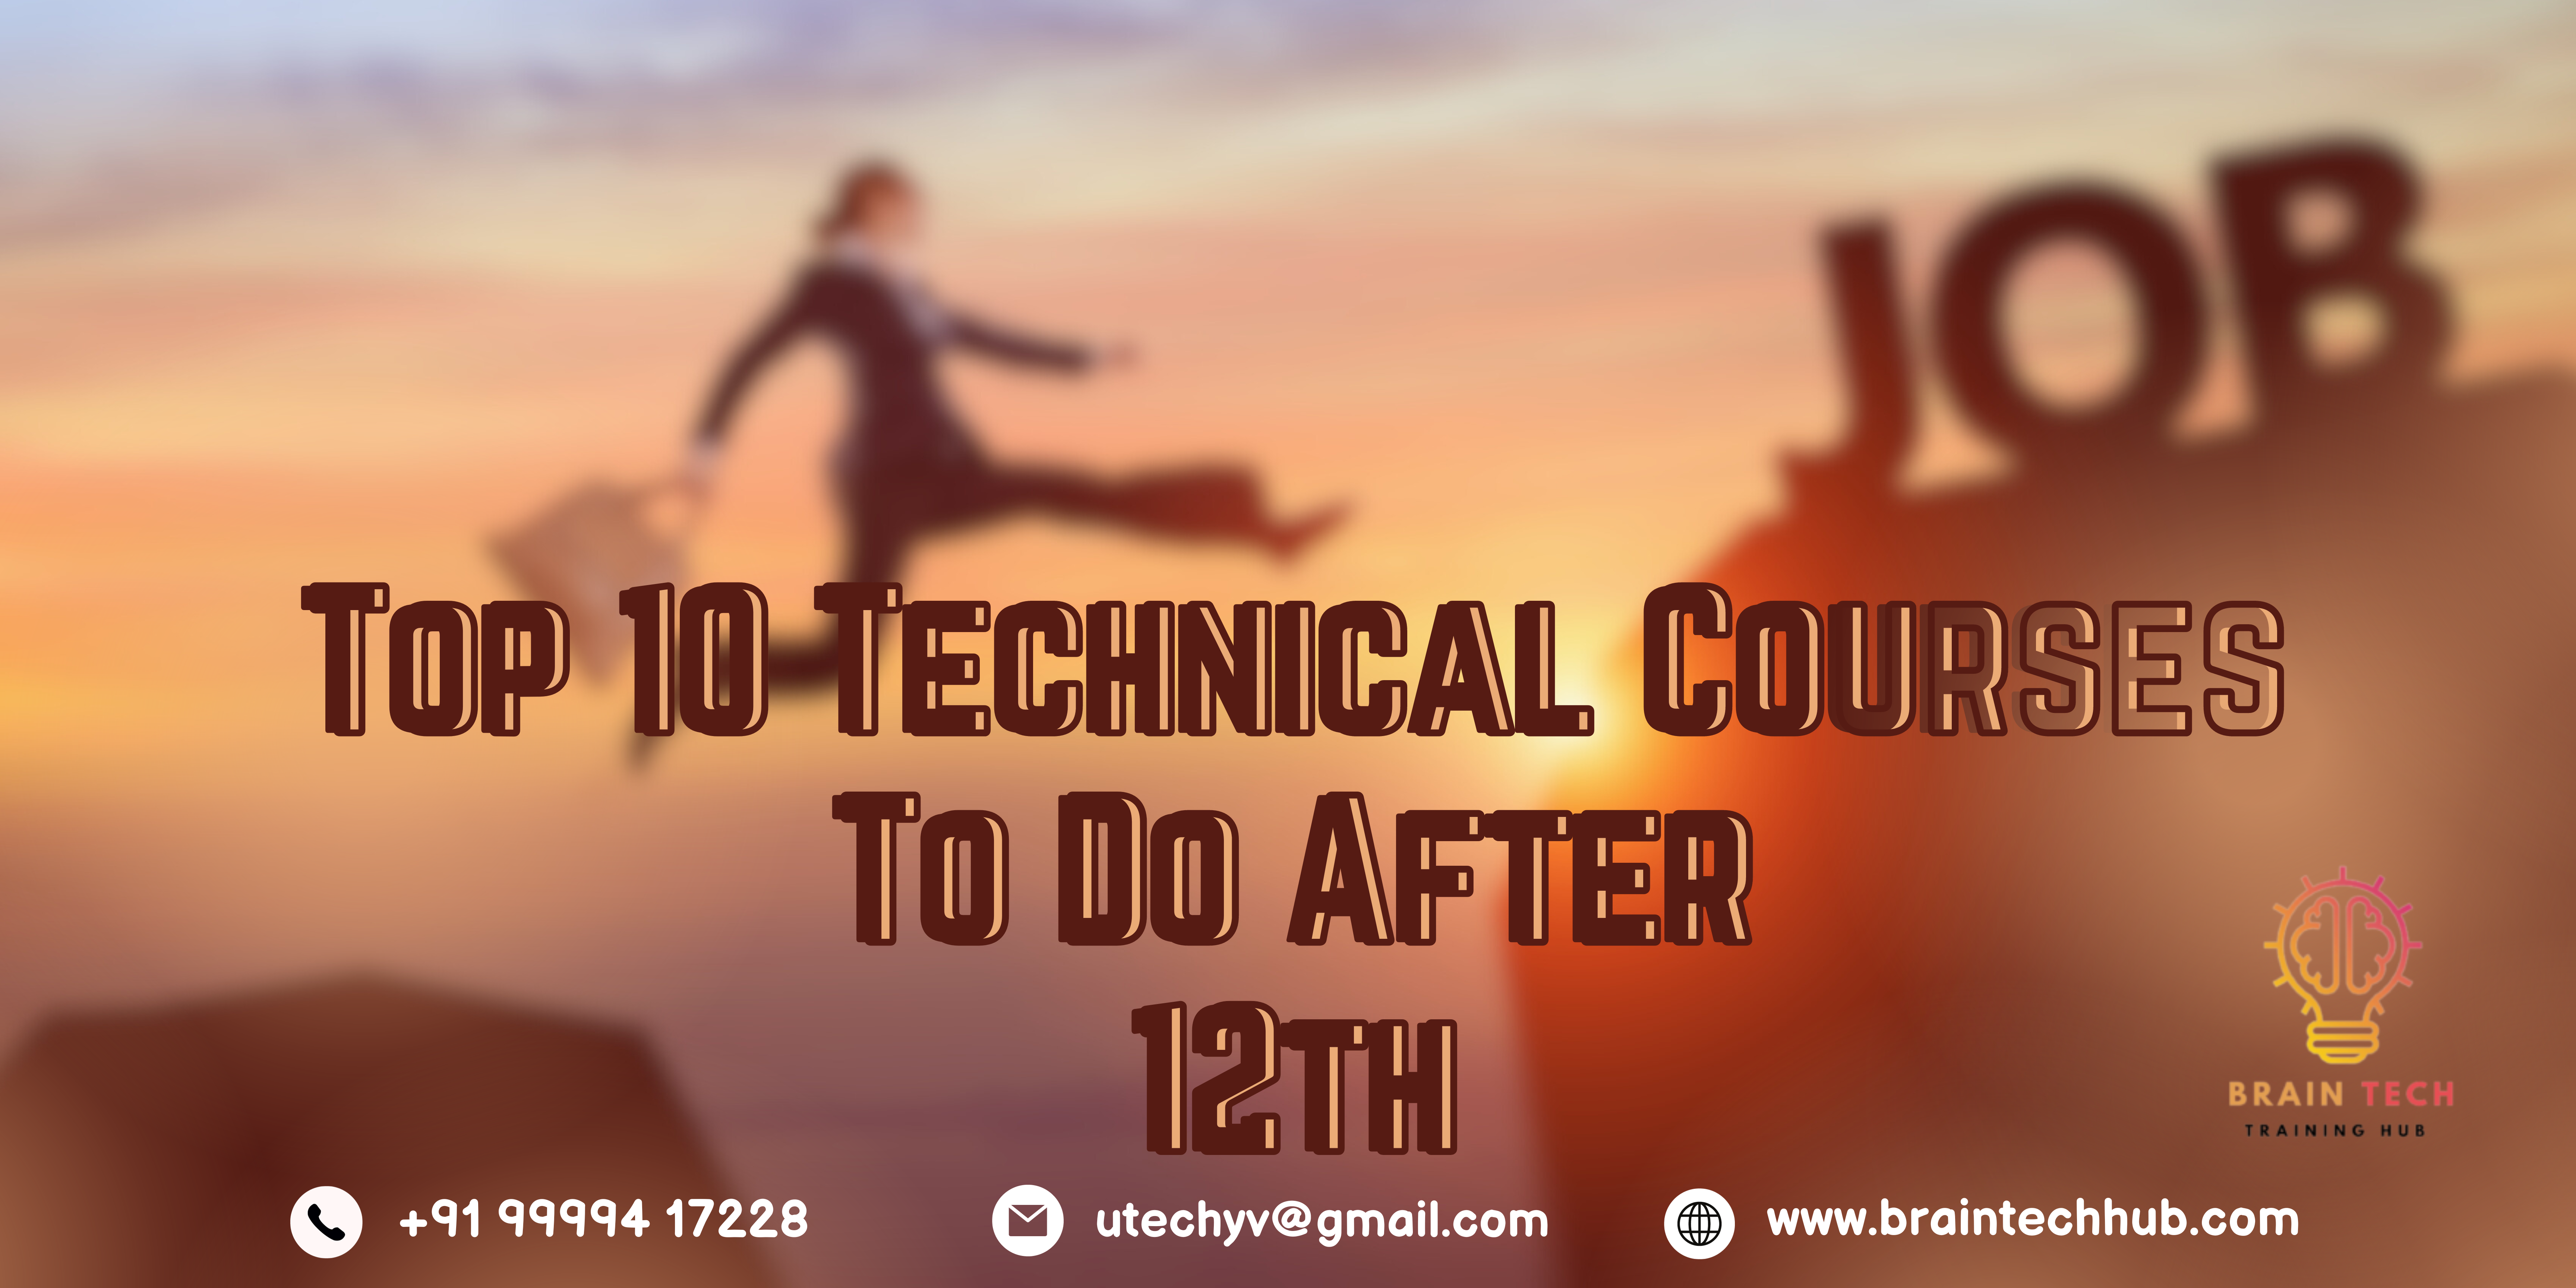 Top 10 Technical Courses To Do After 12th